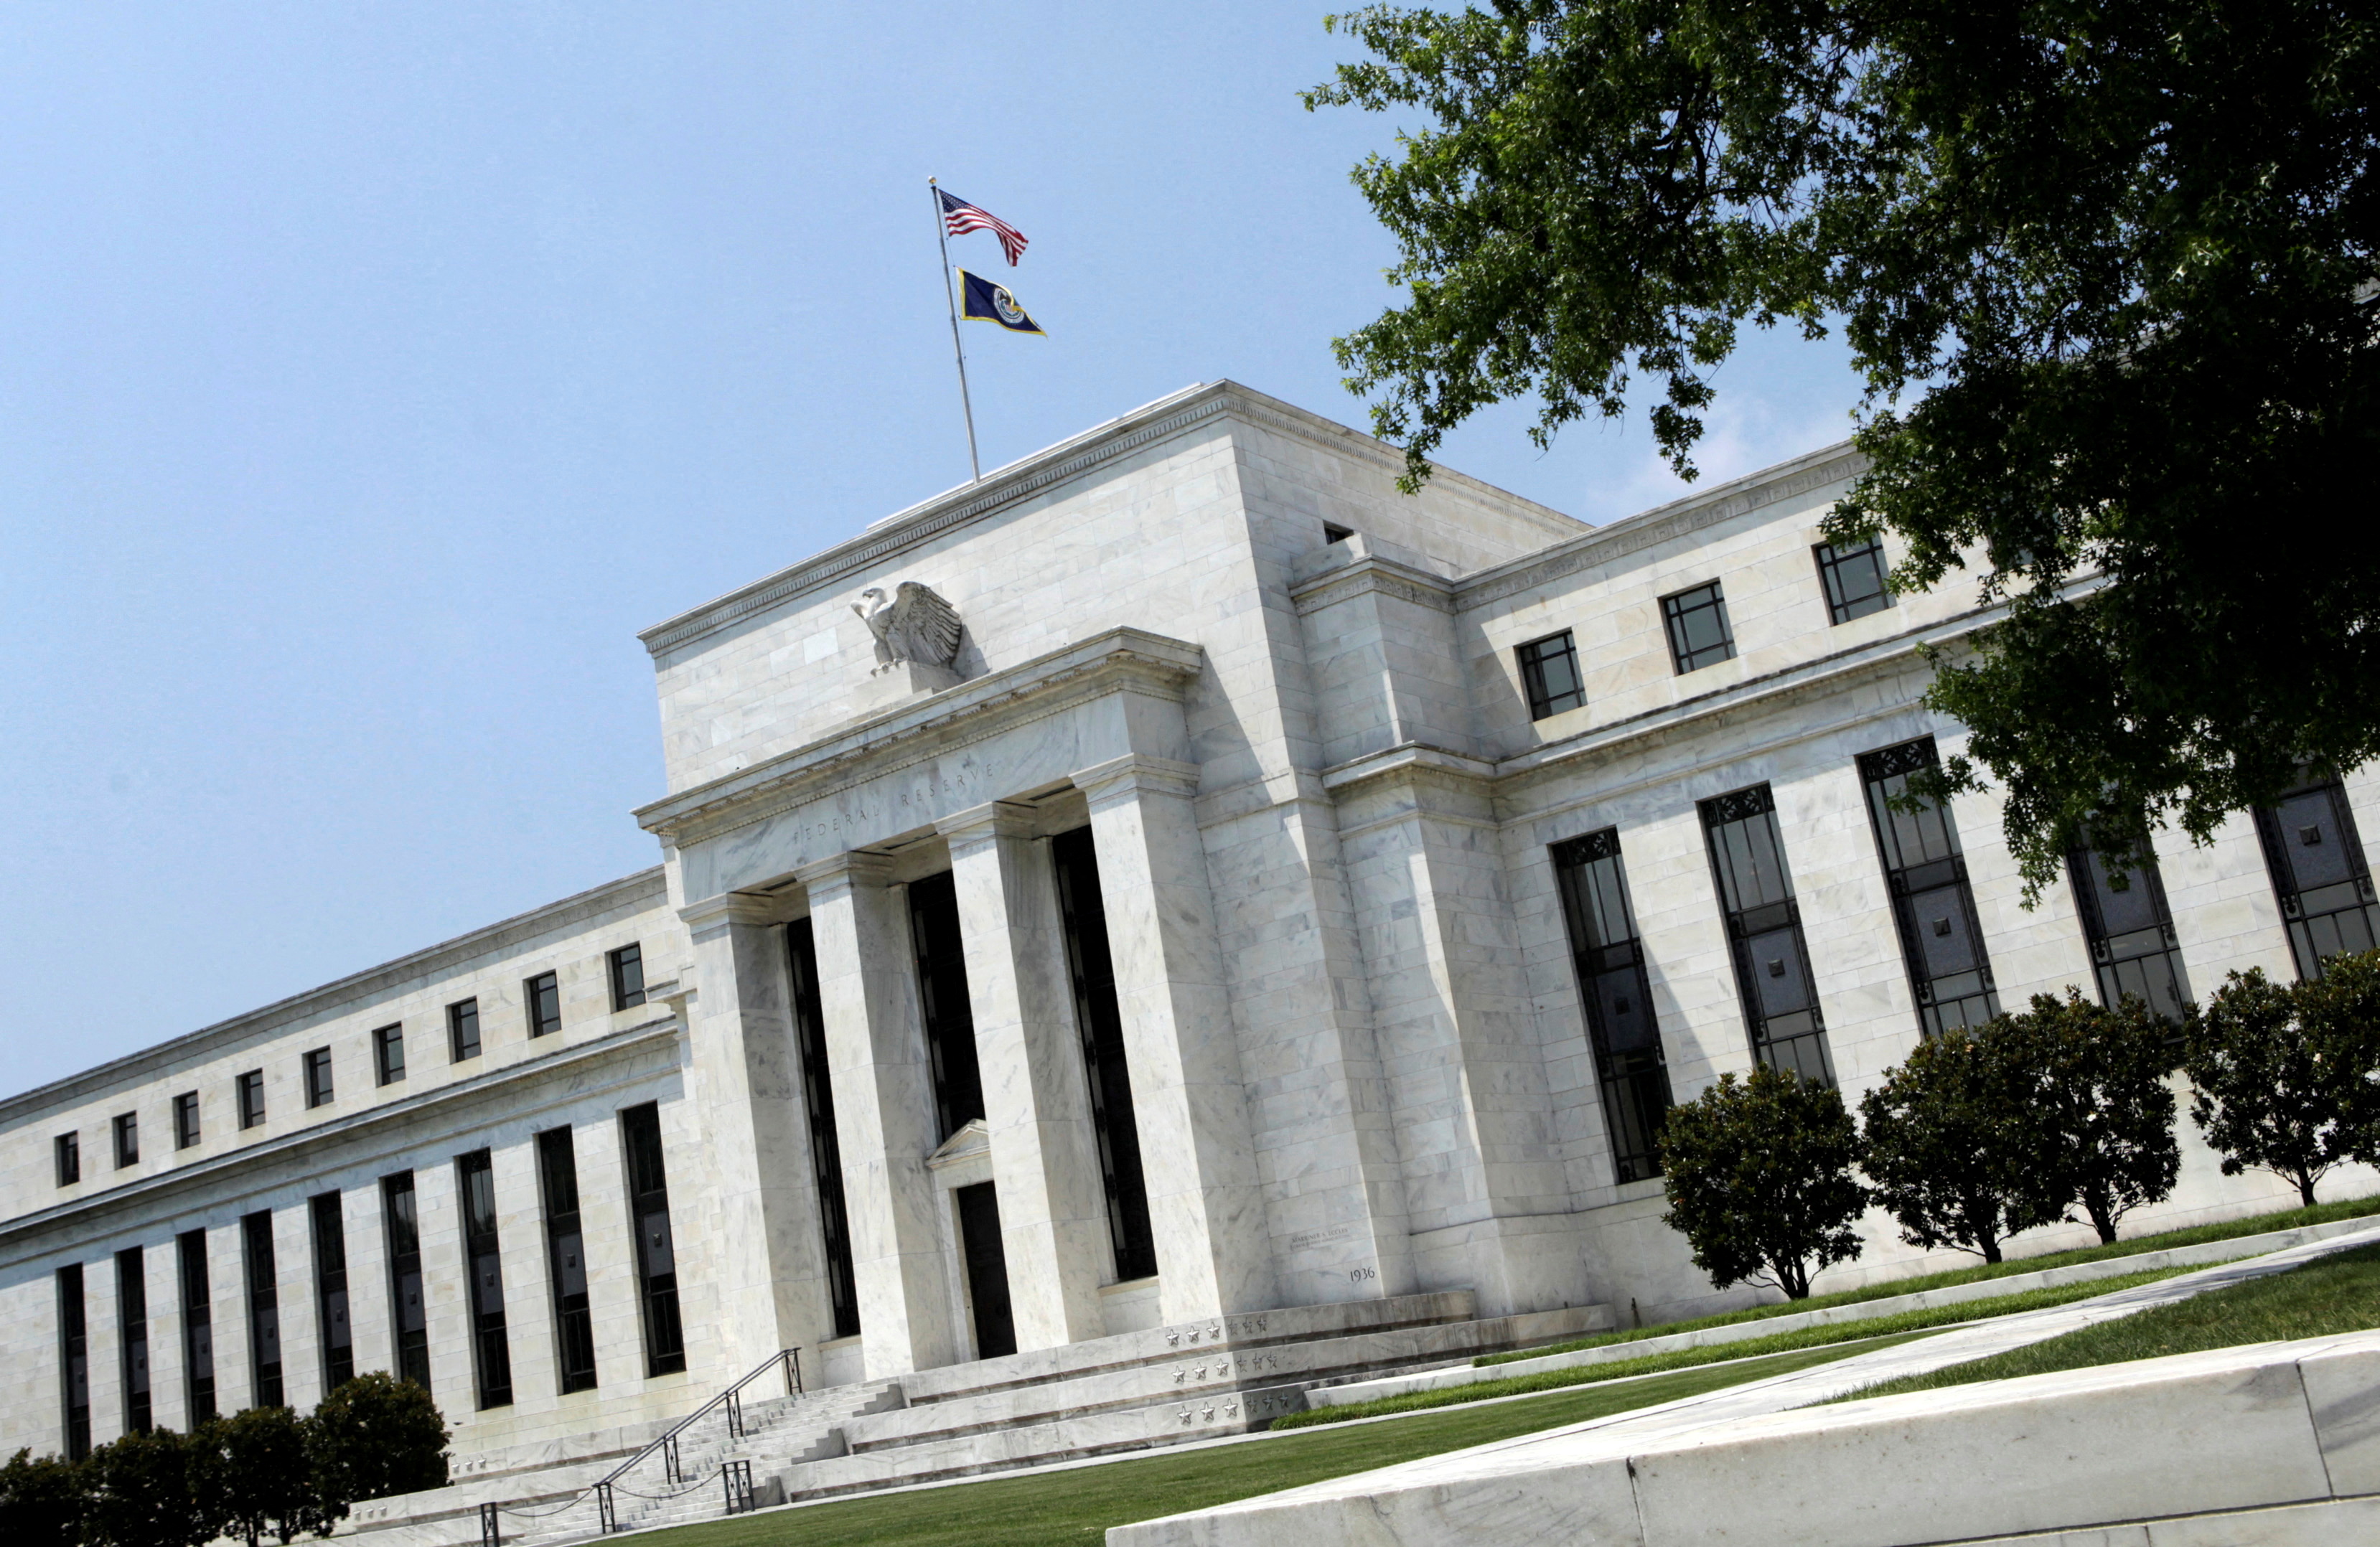 The Federal Reserve building is seen in Washington June 19, 2012. REUTERS/Yuri Gripas/File Photo